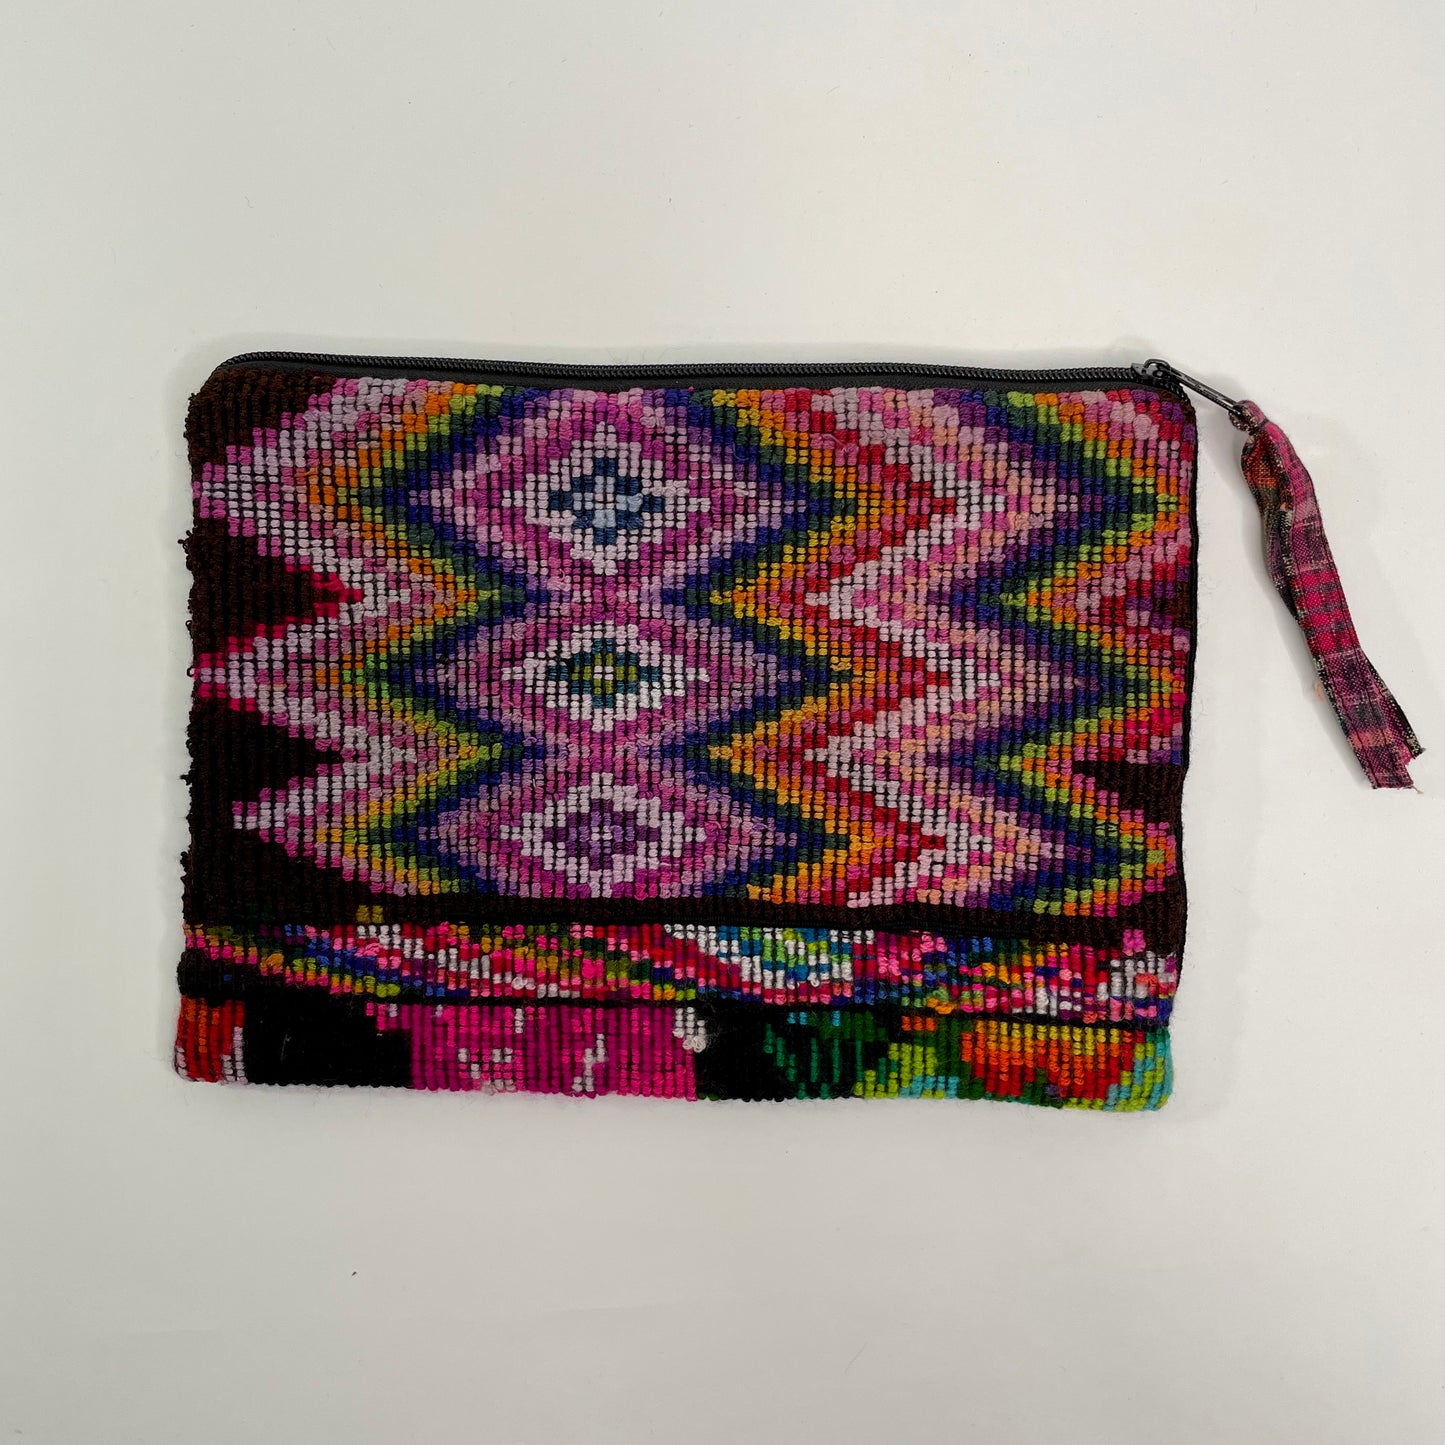 Large red cosmetic bag/clutch featuring fabric from Chichicastenango, Guatemala.